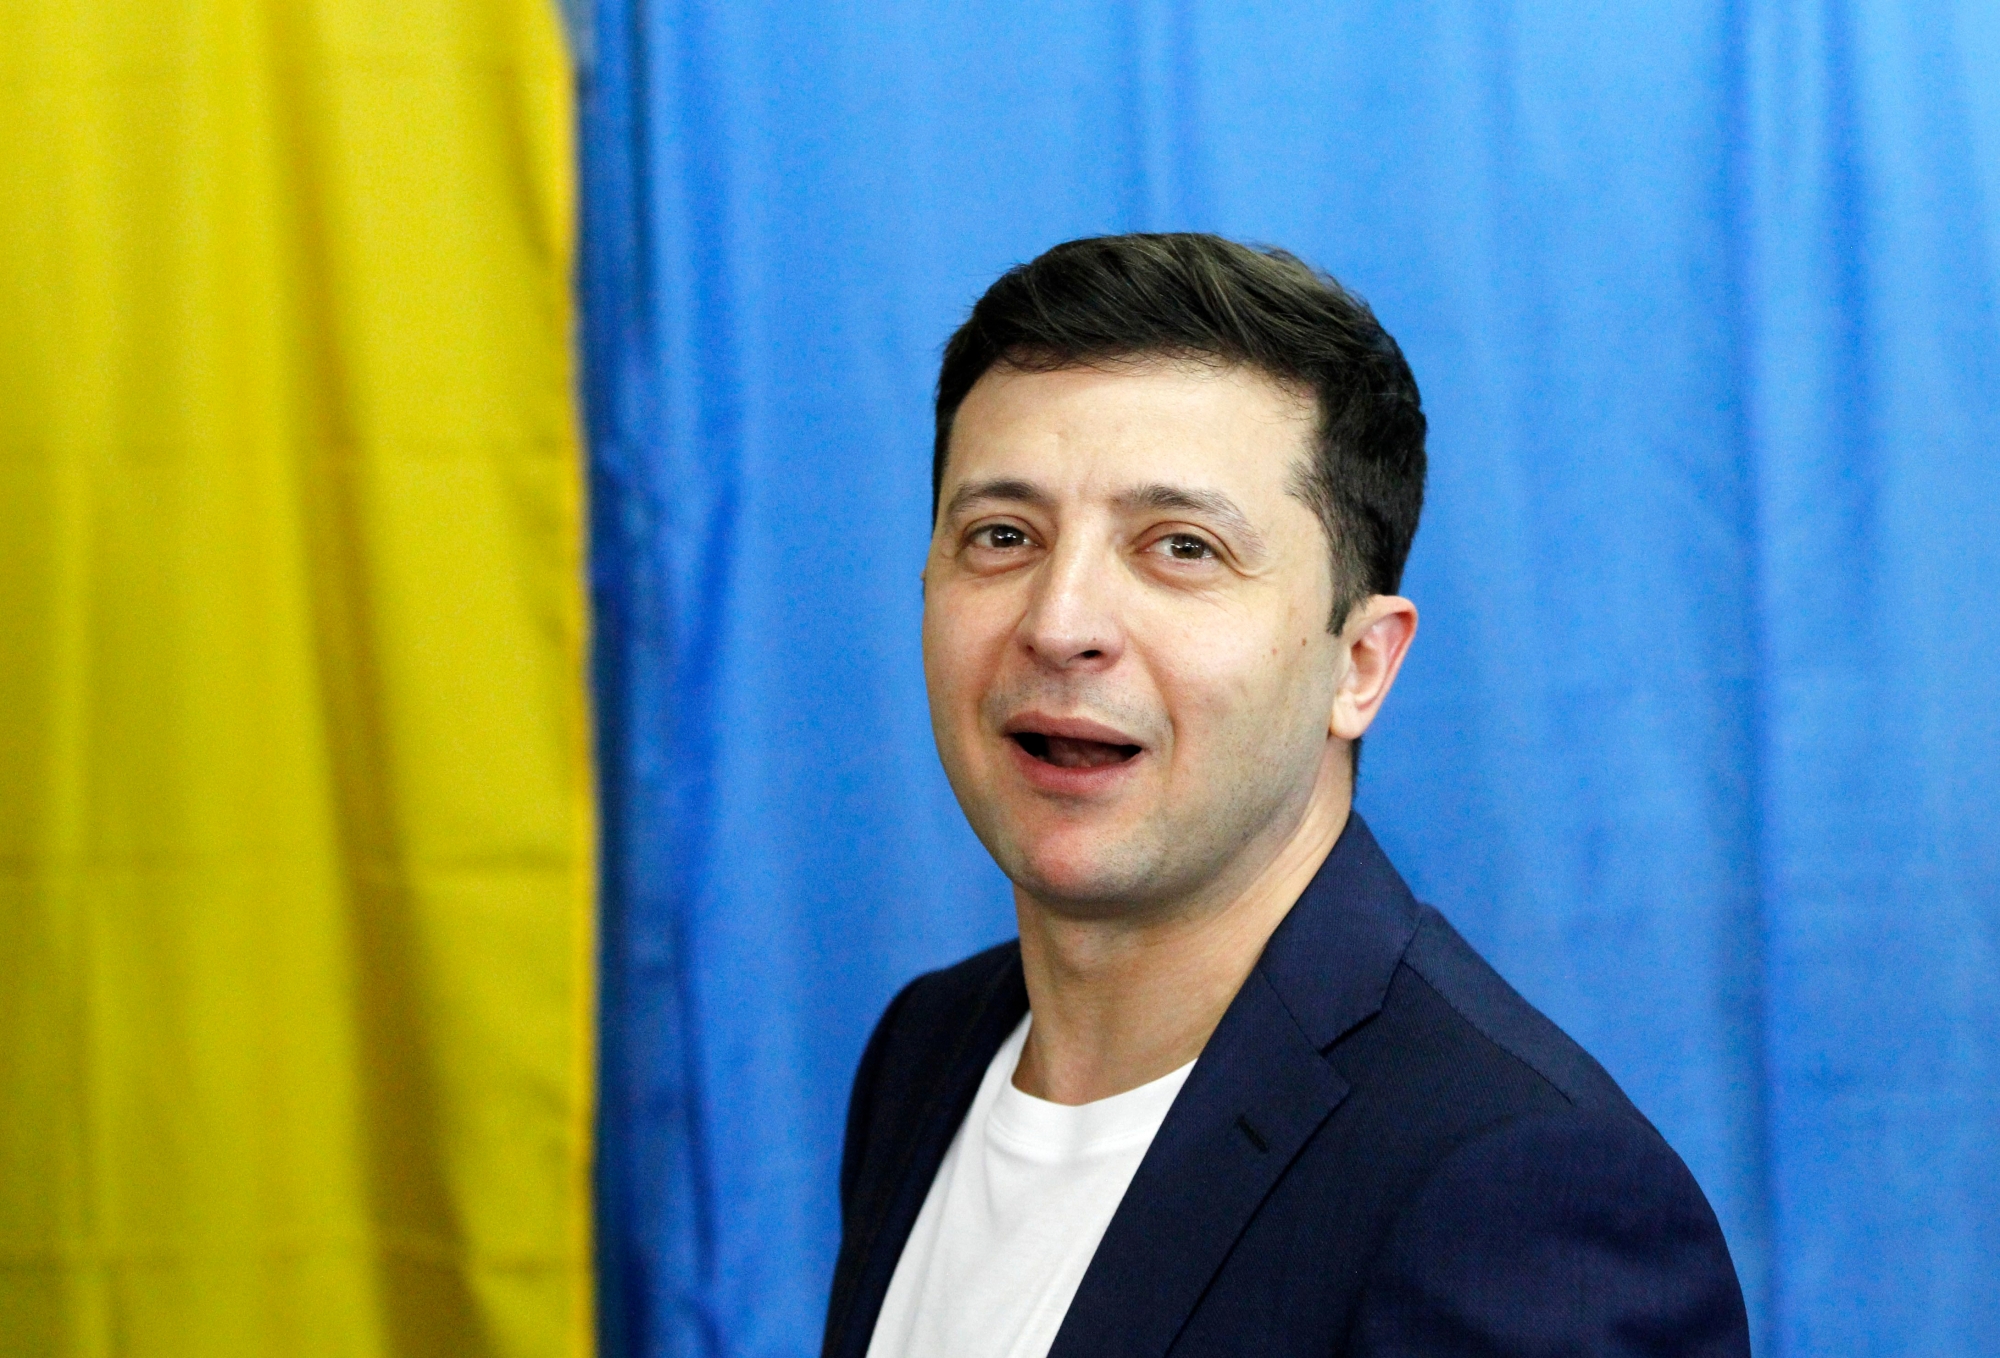 epa07519351 Ukrainian Presidential candidate Volodymyr Zelensky reacts at a polling station during Presidential elections in Kiev, Ukraine, 21 April 2019. Ukrainians vote in the second round of Presidential elections on 21 April 2019. After the first round of elections, showman Volodymyr Zelensky is a frontrunner with 30.24 percent of votes and incumbent president Petro Poroshenko is a runner-up with 15.95 percent of votes.  EPA/STEPAN FRANKO UKRAINE PRESIDENT ELECTIONS